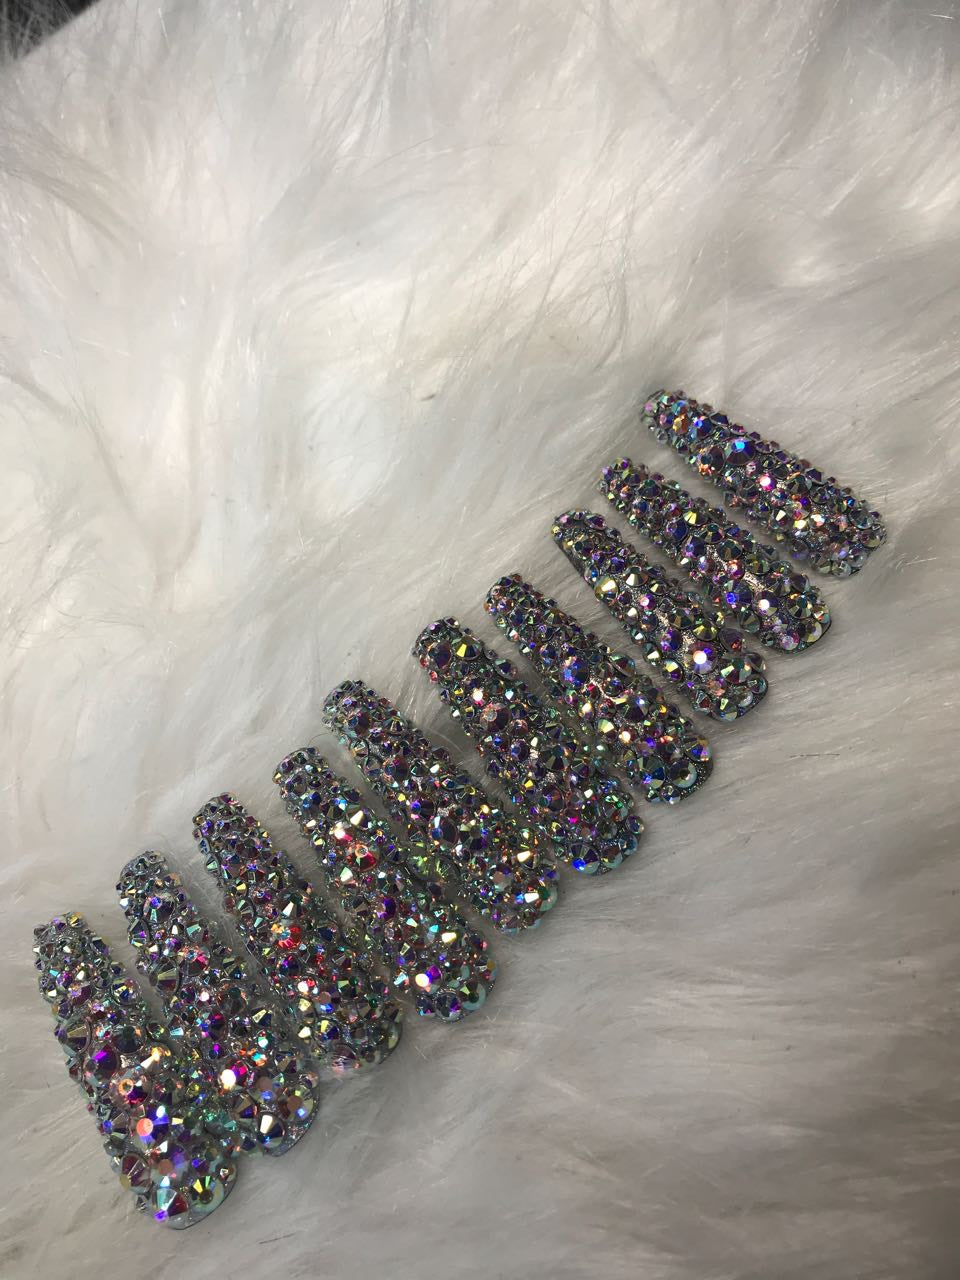 Blinged out xl coffin set